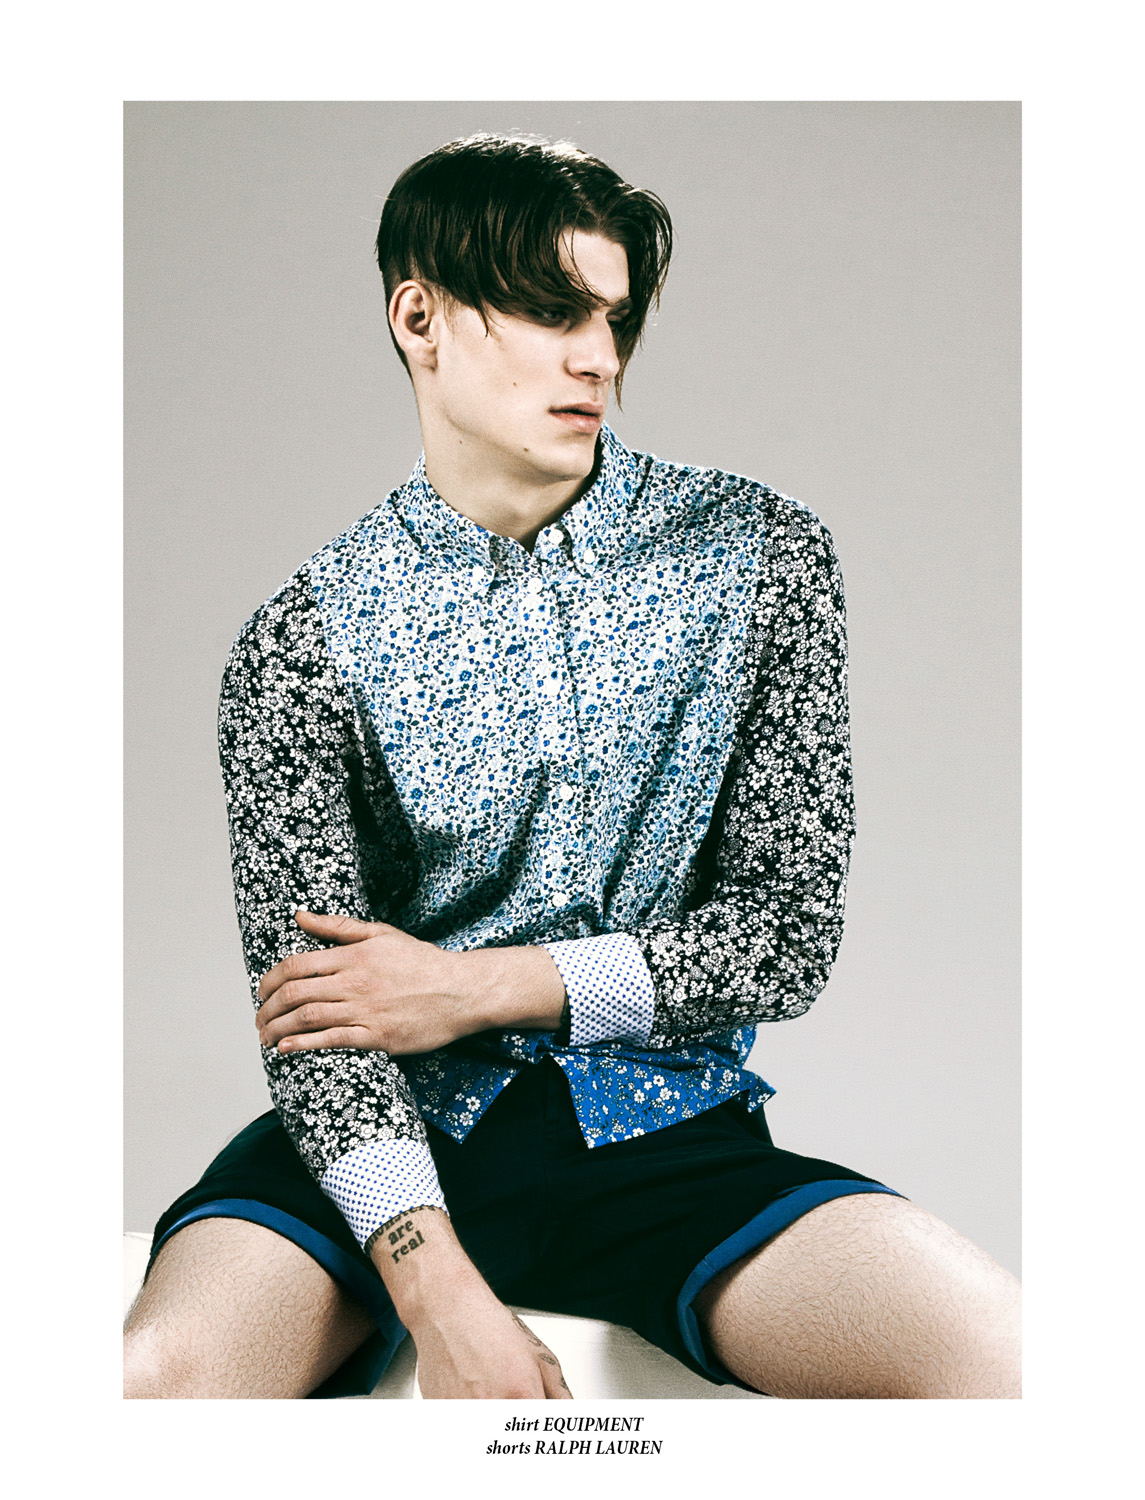 Steve Milatos By Joey Leo For Chasseur Magazine Issue 10 Chasseur